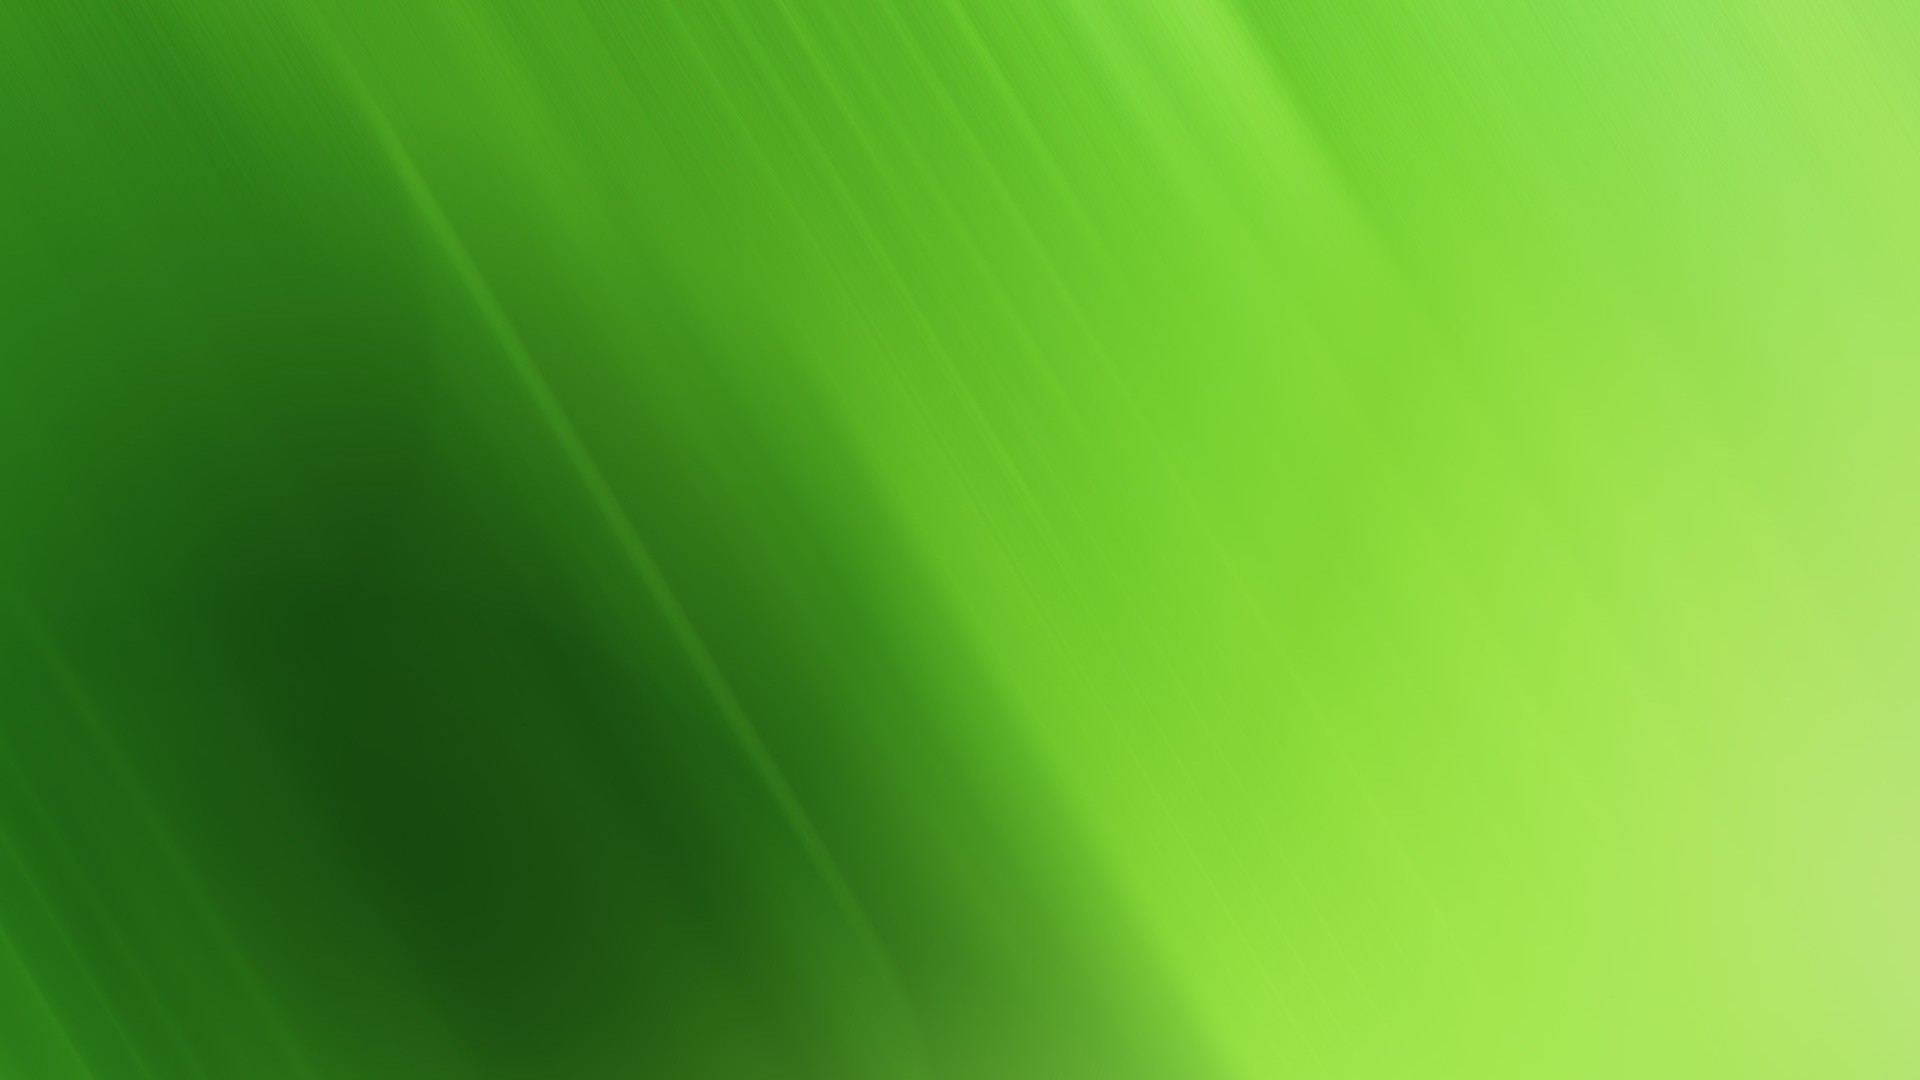 Lime Green Desktop Backgrounds HD with image resolution 1920x1080 pixel. You can use this wallpaper as background for your desktop Computer Screensavers, Android or iPhone smartphones